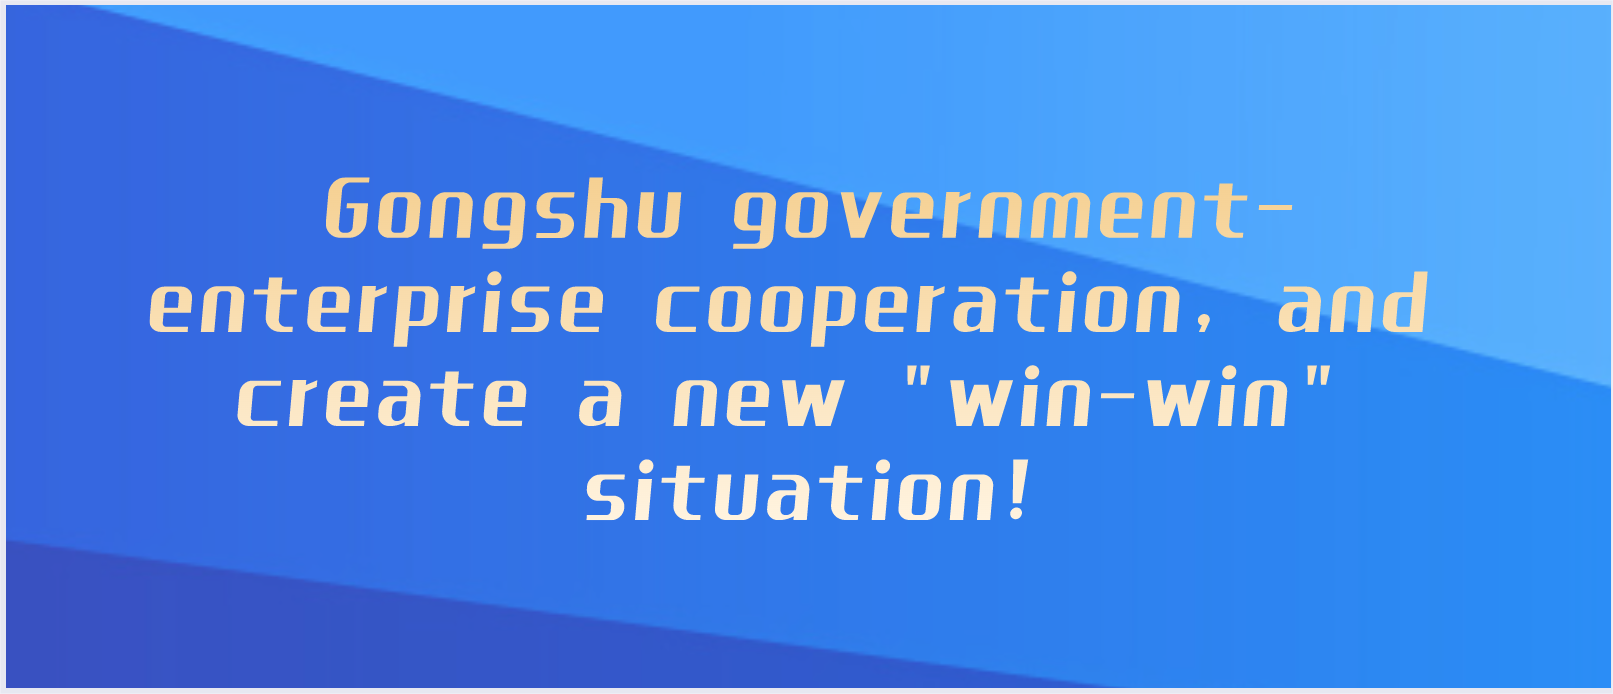 Gongshu government-enterprise cooperation, and create a new "win-win" situation!